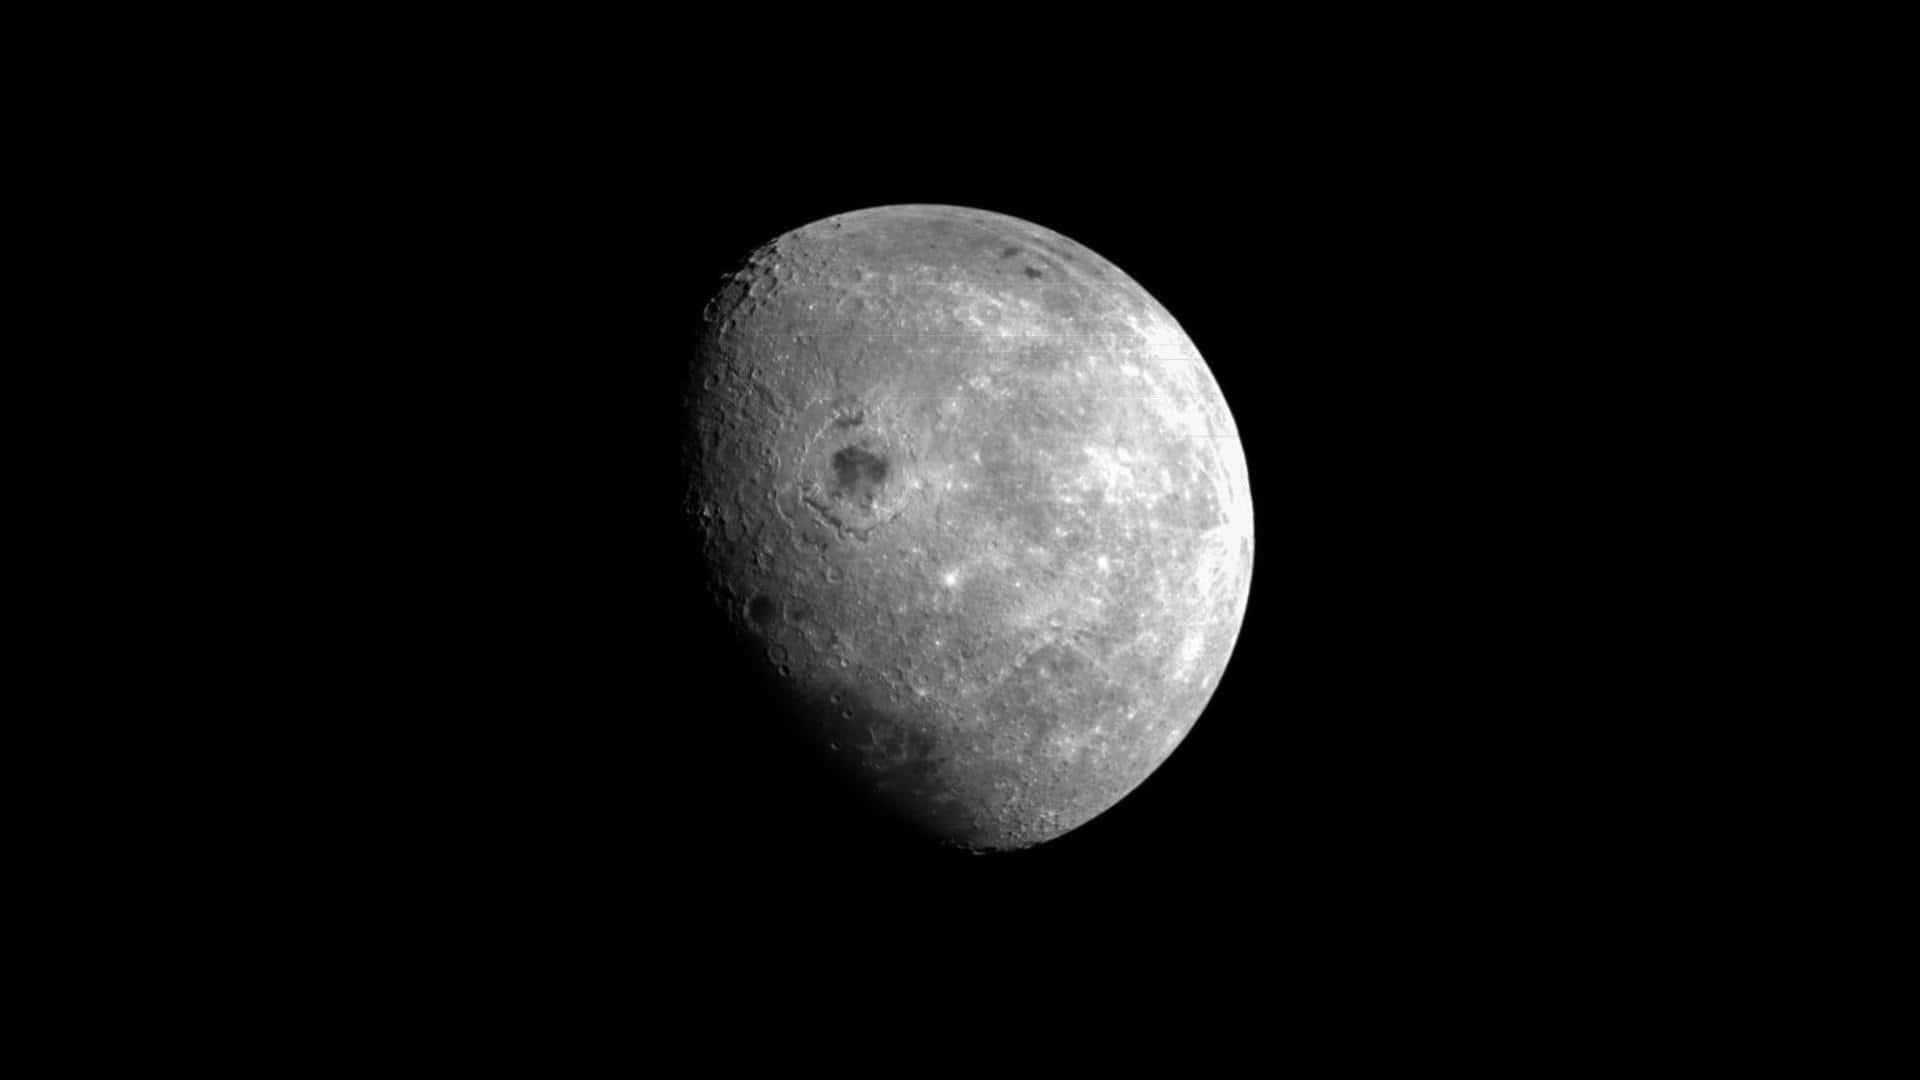 China plans to launch a Moon-orbiting telescope by 2026